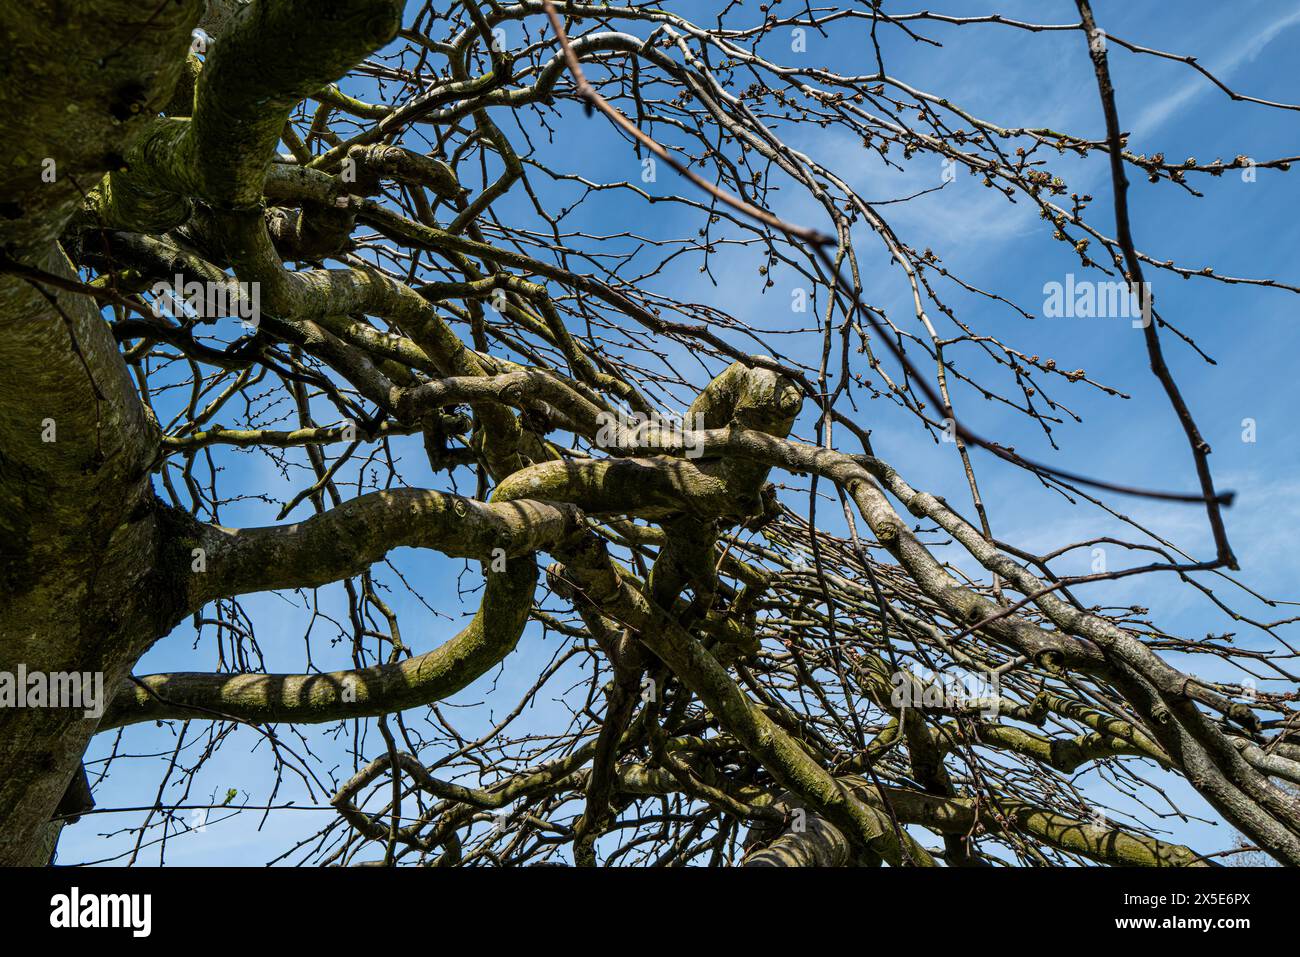 The leafless drooping twisted branches of Ulmus glabra ‘Camperdownii’ Weeping Wych Elm in Trenance Gardens in Newquay in Cornwall in the UK. Stock Photo